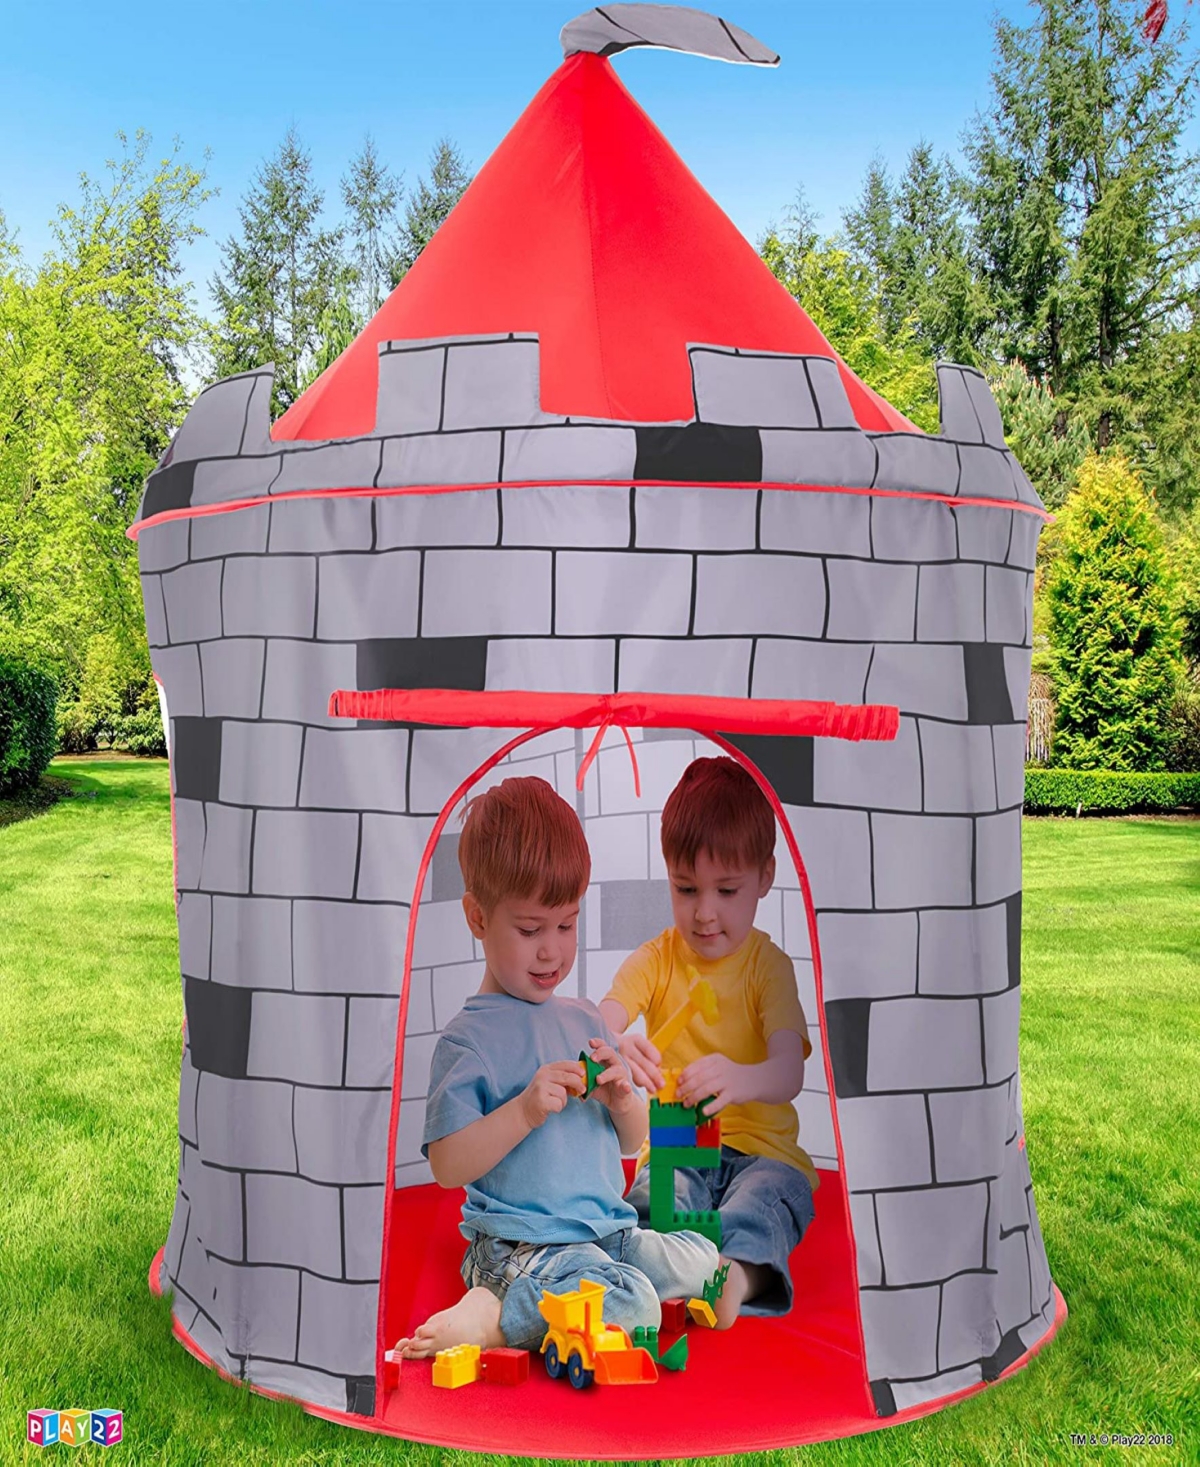 Shop Play22 Kids Play Tent Knight Castle Portable Fordable Camper Tent In Multicolor